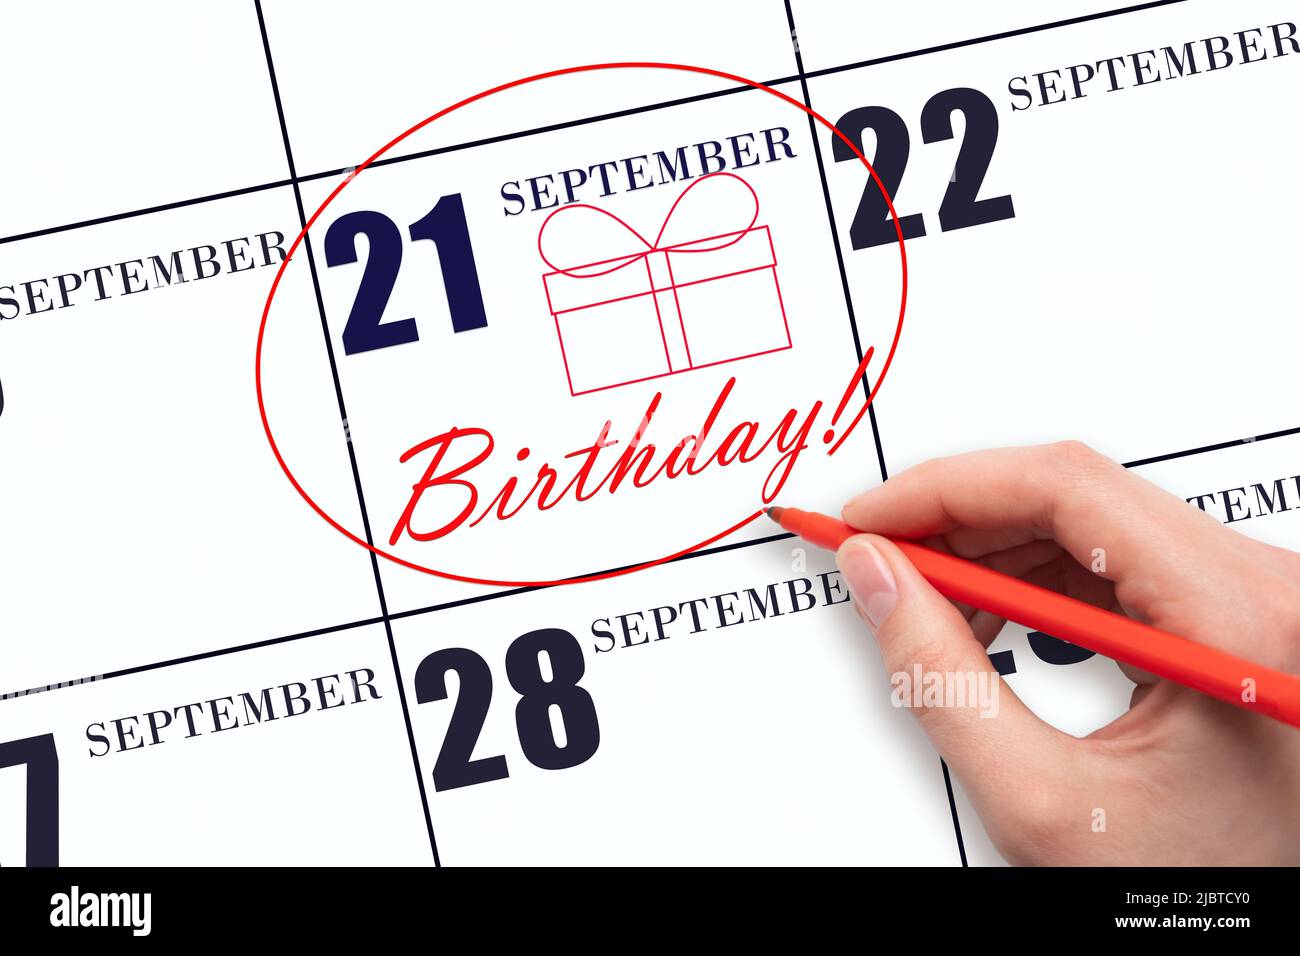 21st day of September. The hand circles the date on the calendar 21 September , draws a gift box and writes the text Birthday. Holiday. Autumn month, Stock Photo